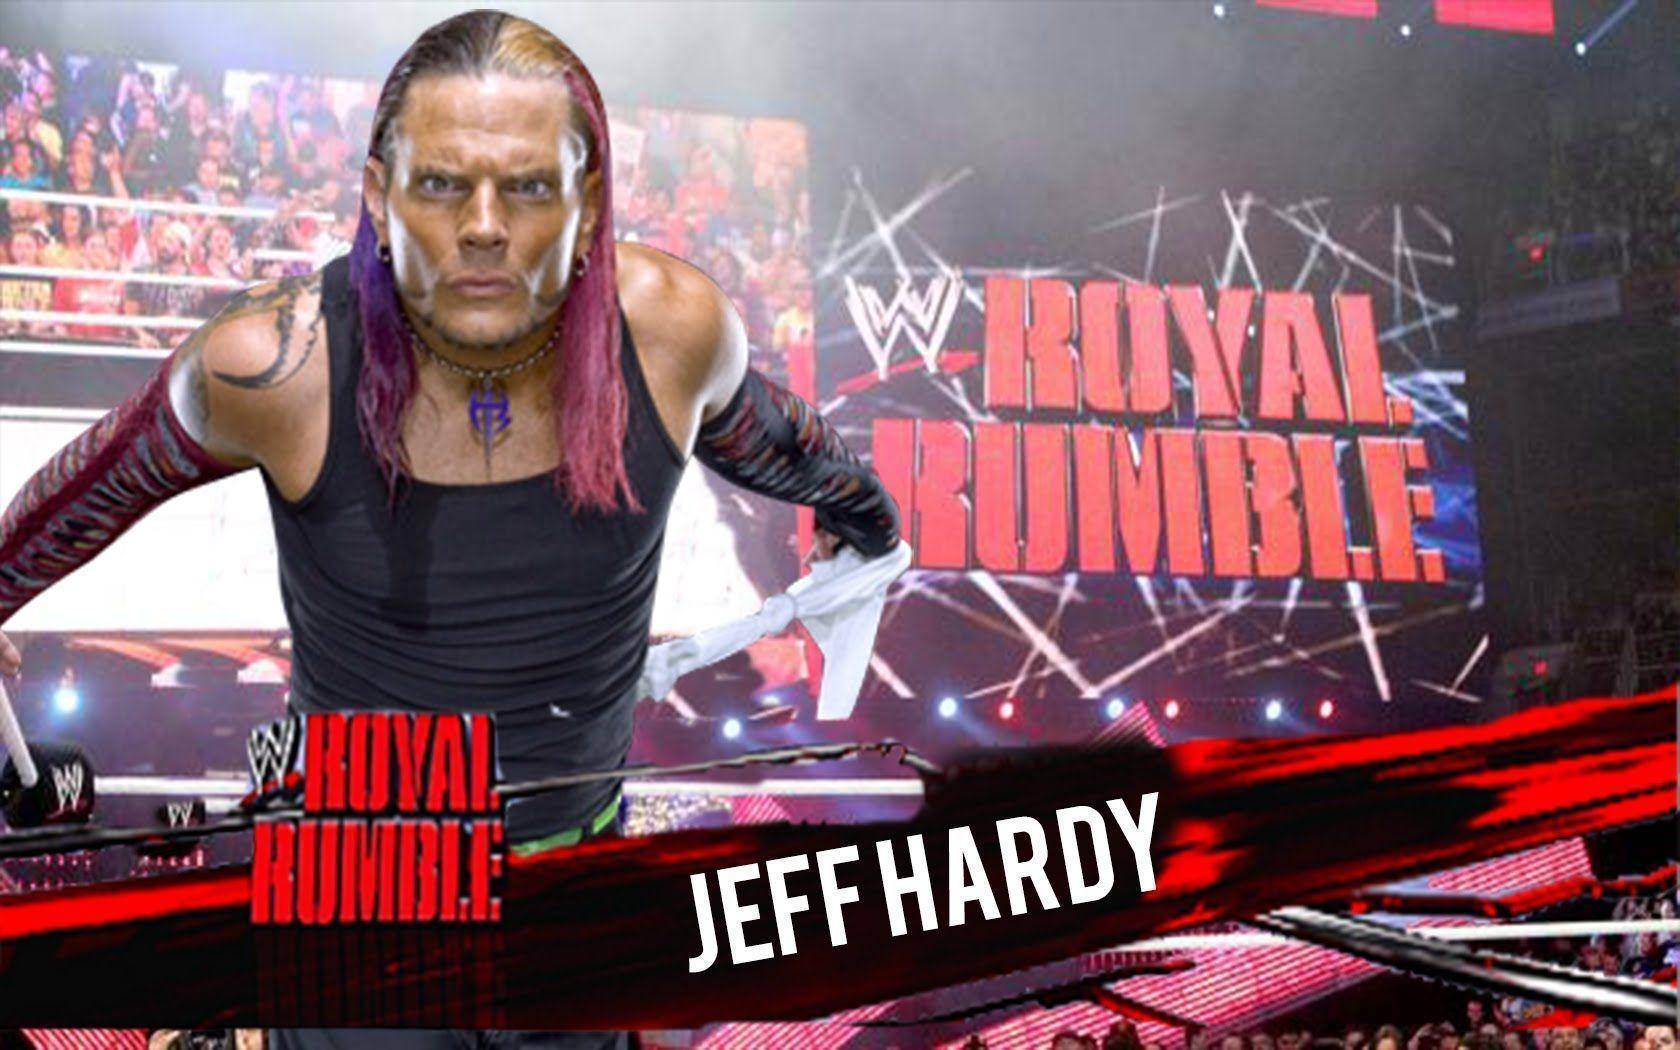 WWE Royal Rumble 2016 Hardy Returns as the Entrant